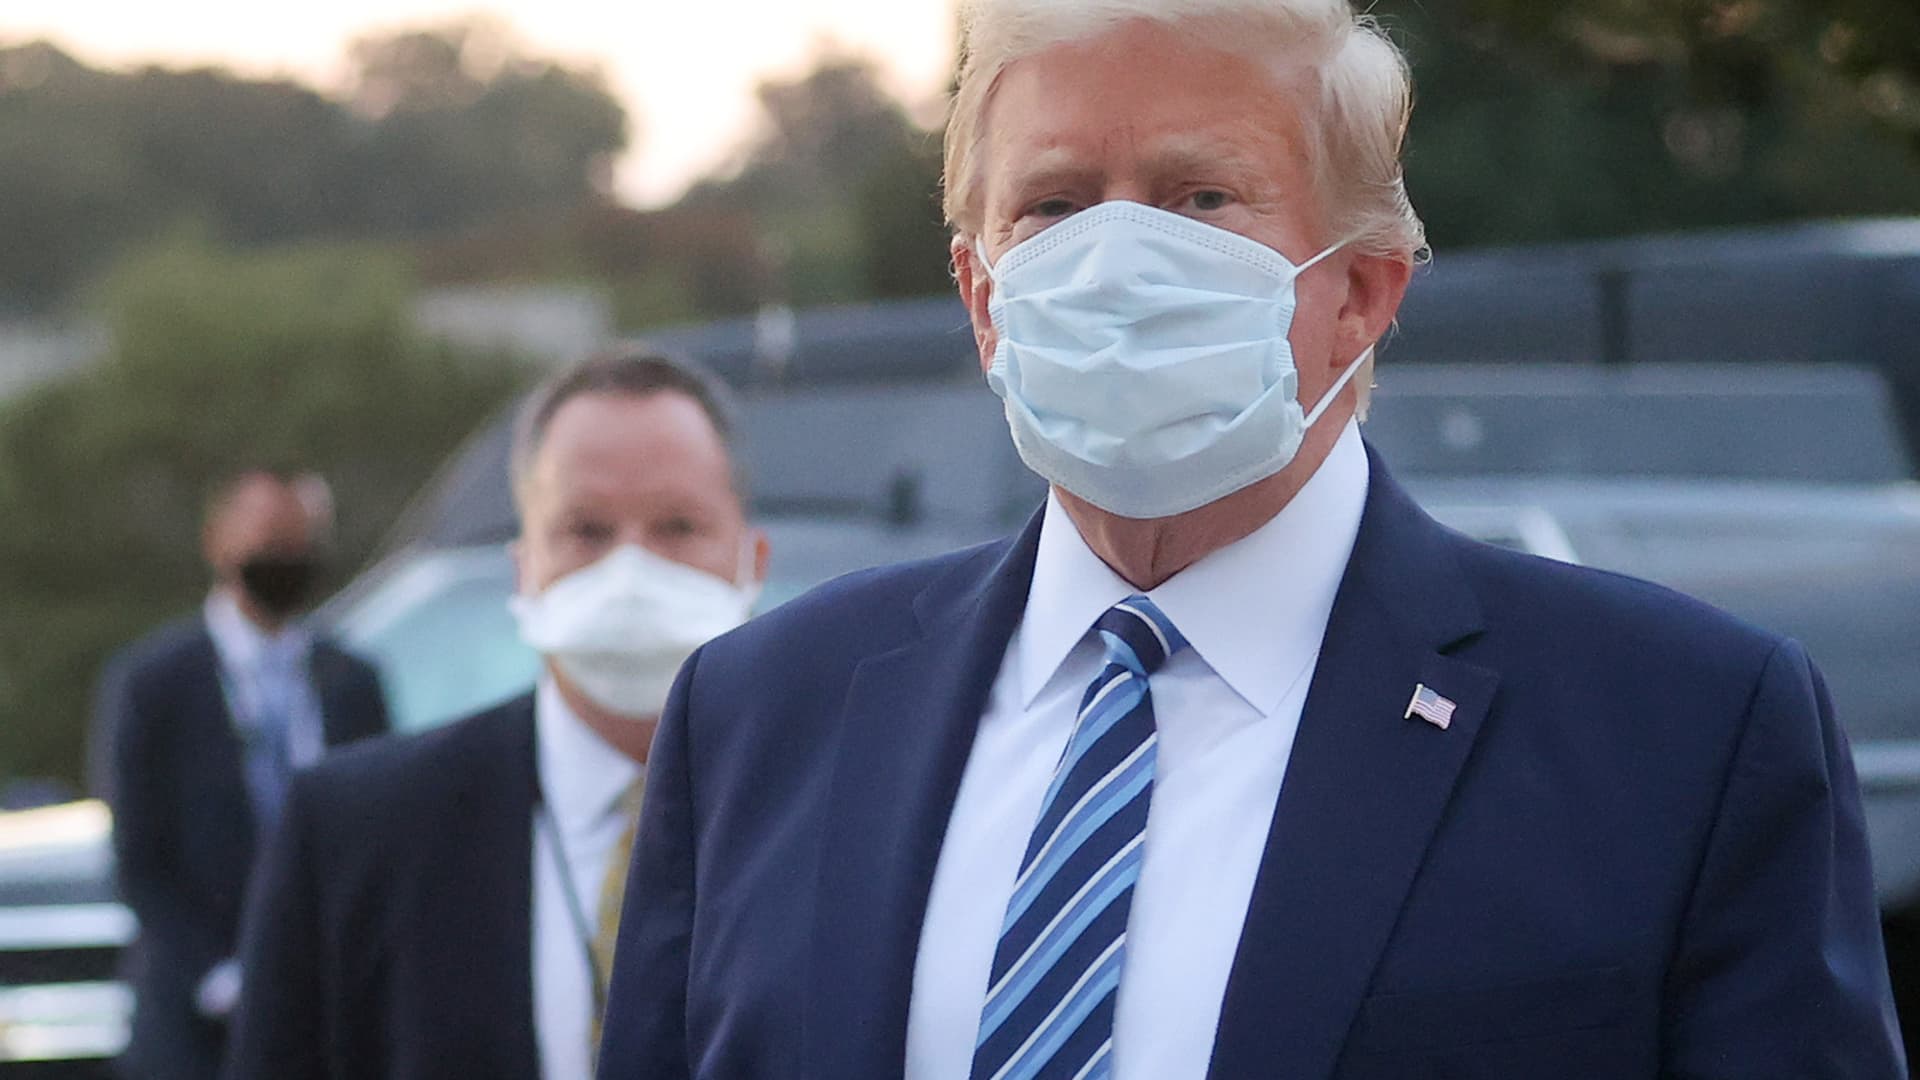 U.S. President Donald Trump looks over at reporters and photographers as the president departs Walter Reed National Military Medical Center after a fourth day of treatment for the coronavirus disease (COVID-19) to return to the White House in Washington from the hospital in Bethesda, Maryland, U.S., October 5, 2020.